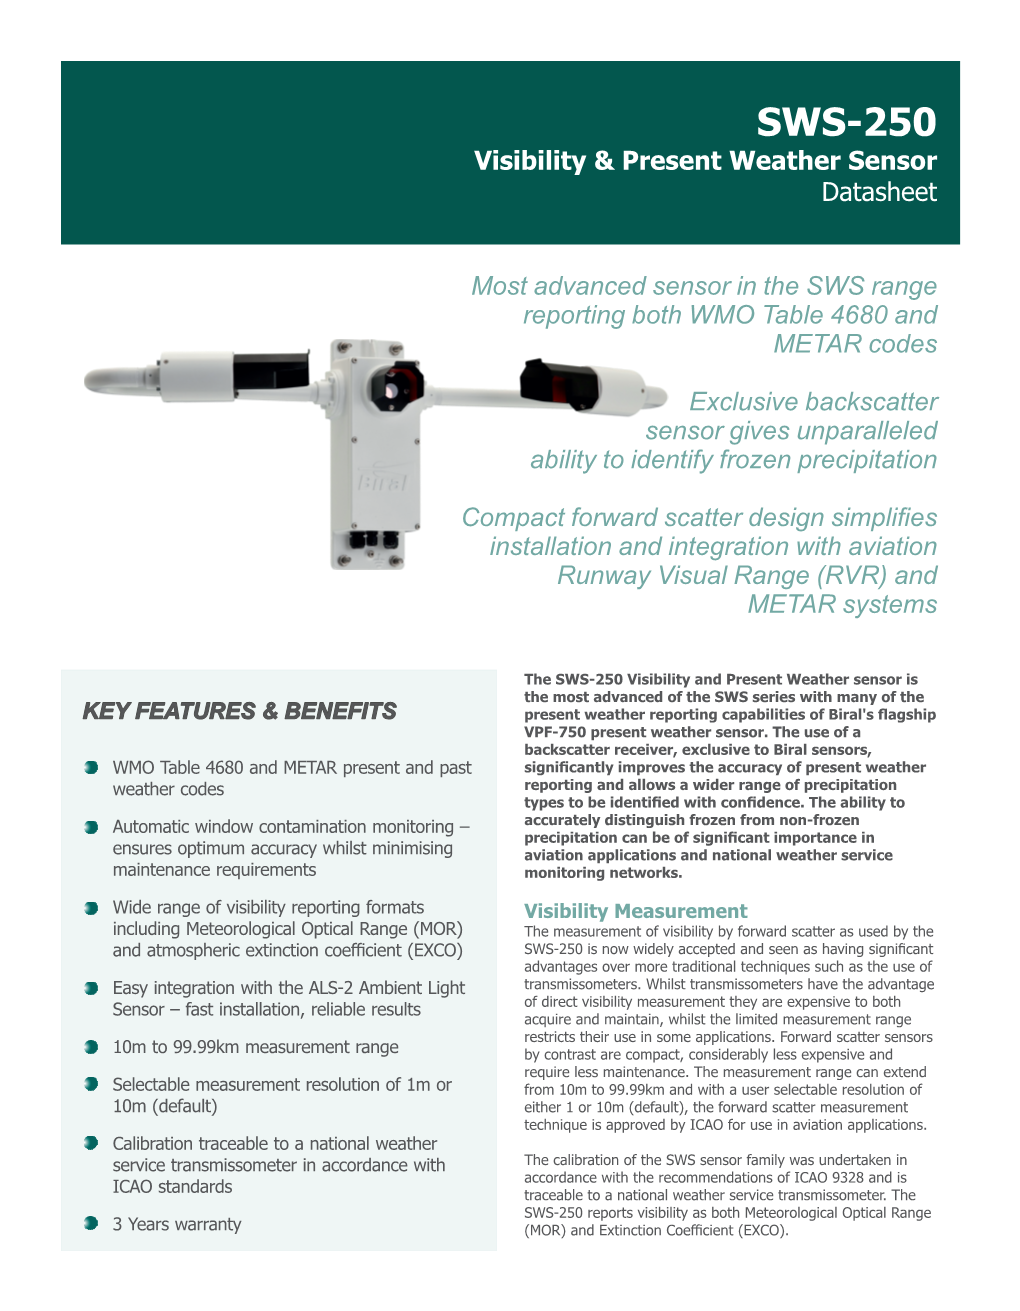 SWS-250 Visibility & Present Weather Sensor Datasheet Visibly Better